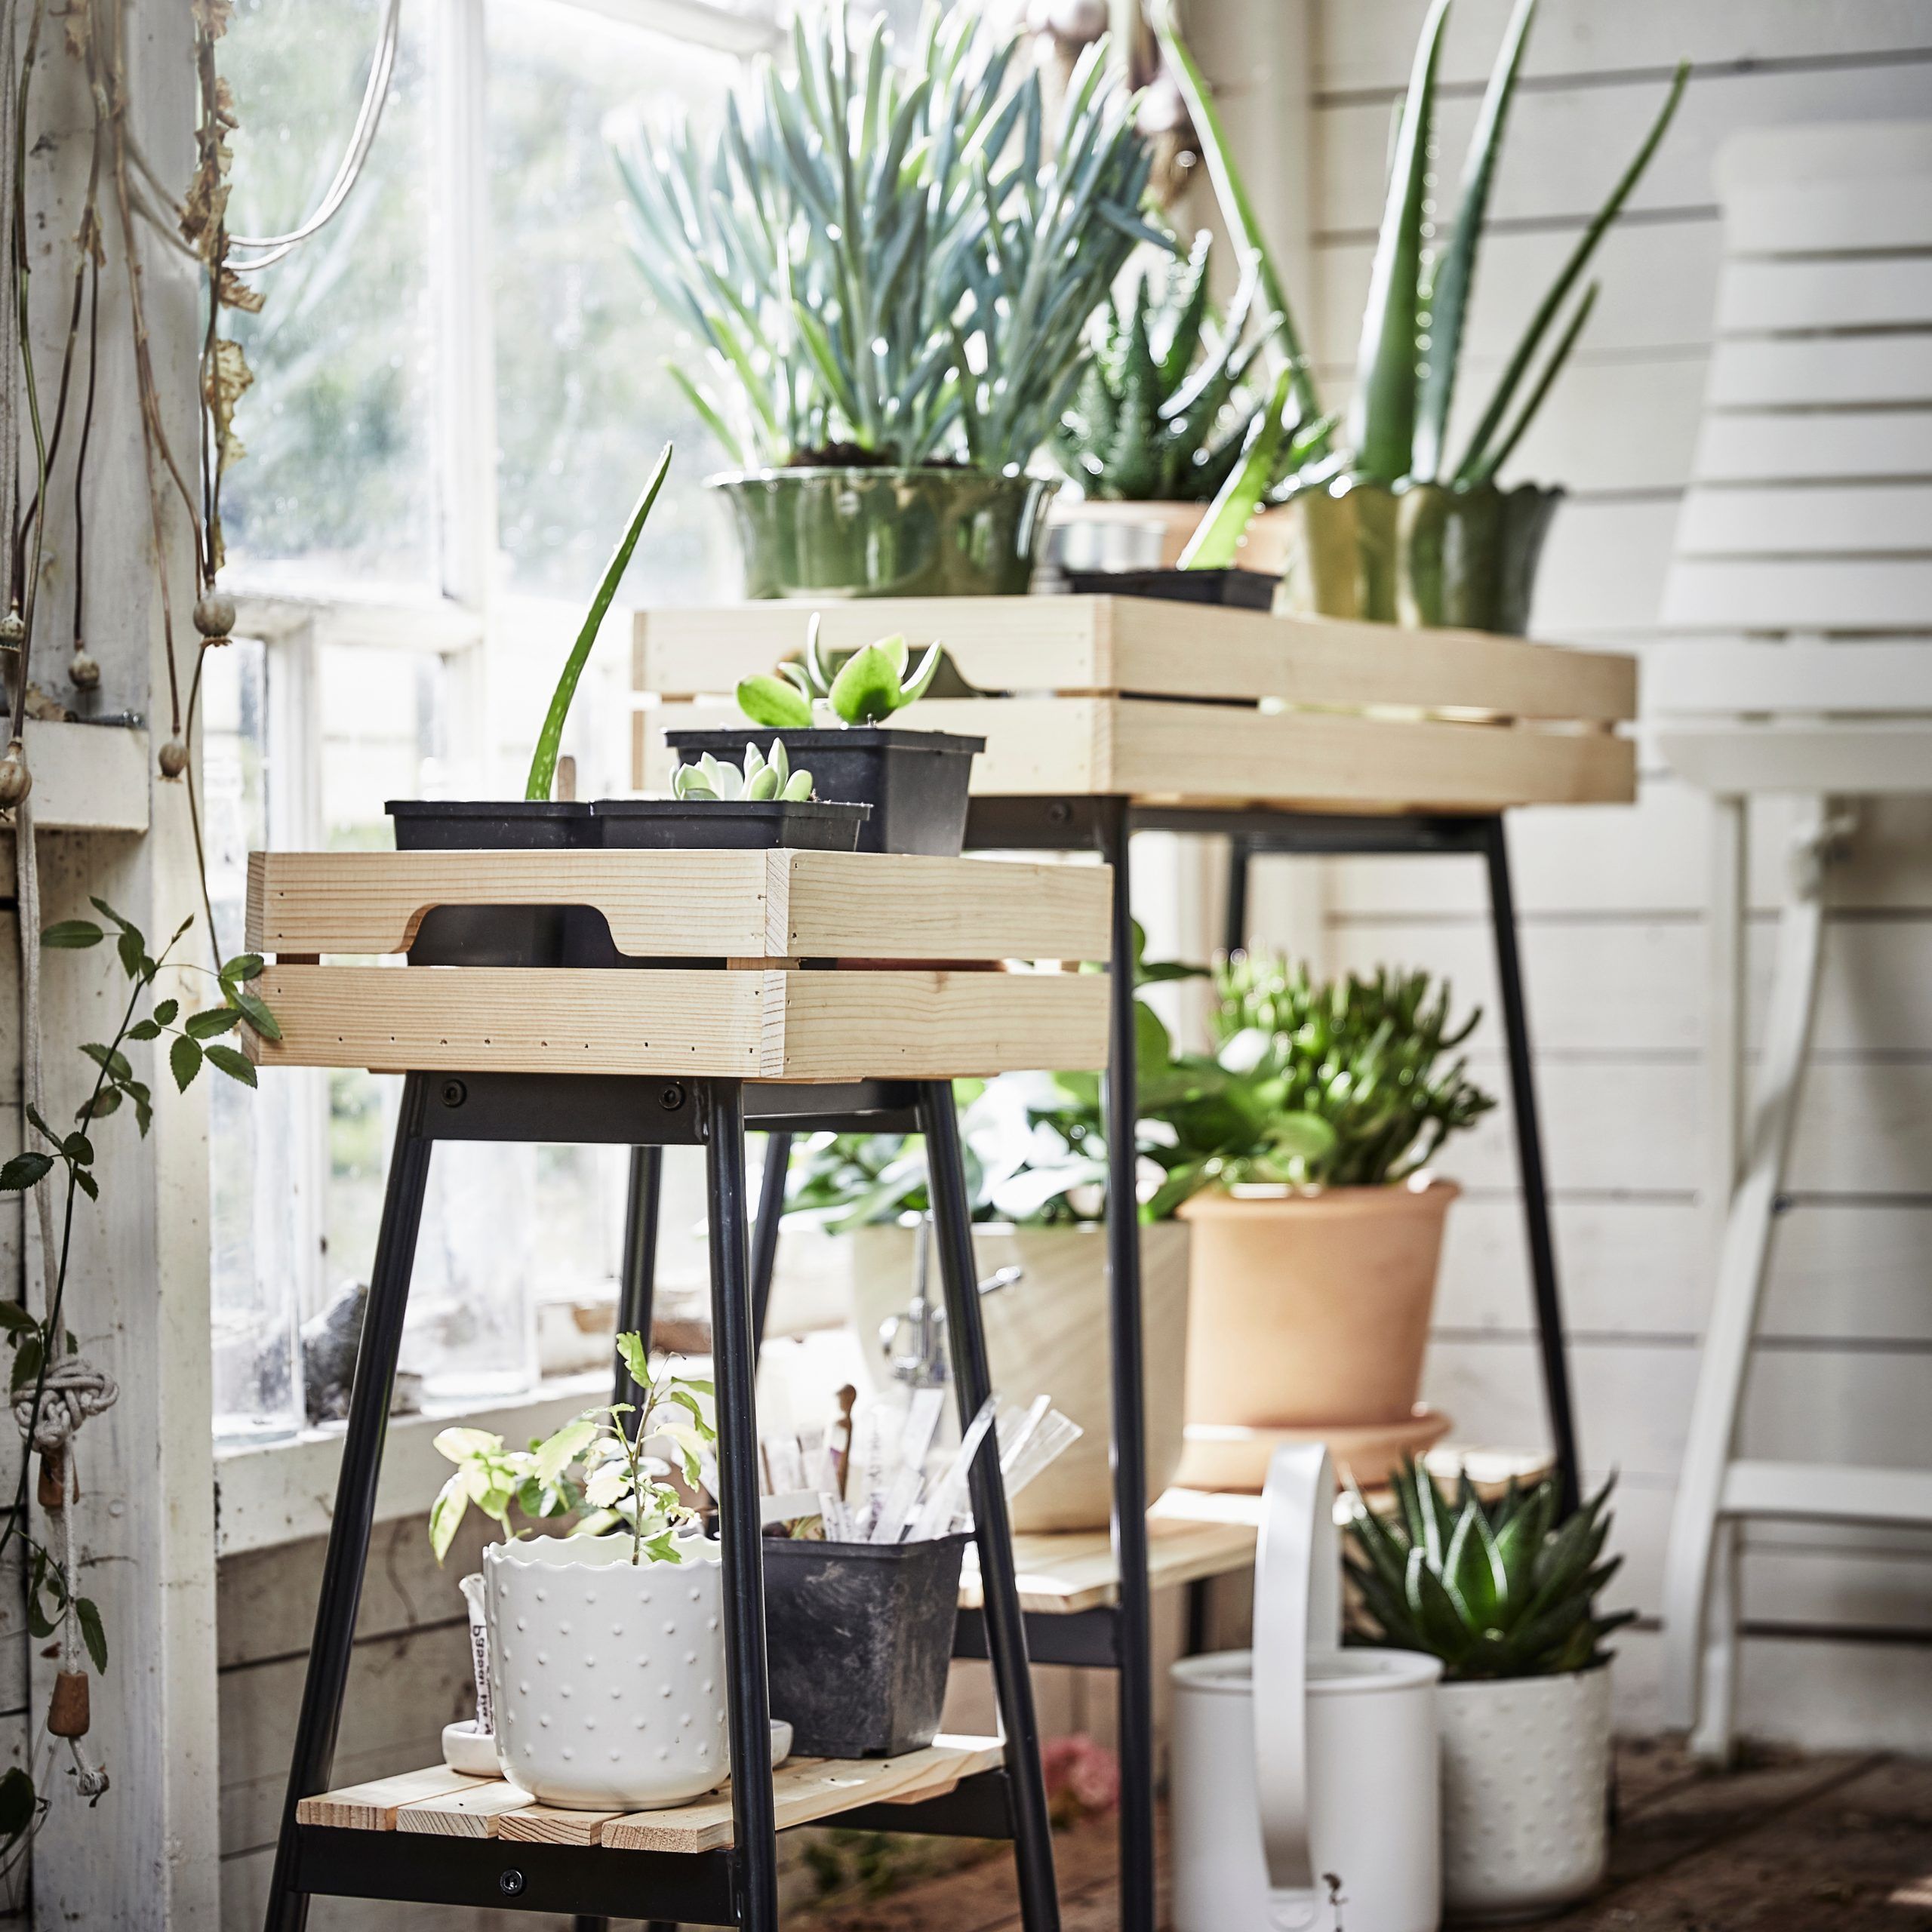 A Sturdy Plant Stand For Your Green Companions – Ikea In Favorite Green Plant Stands (View 4 of 10)